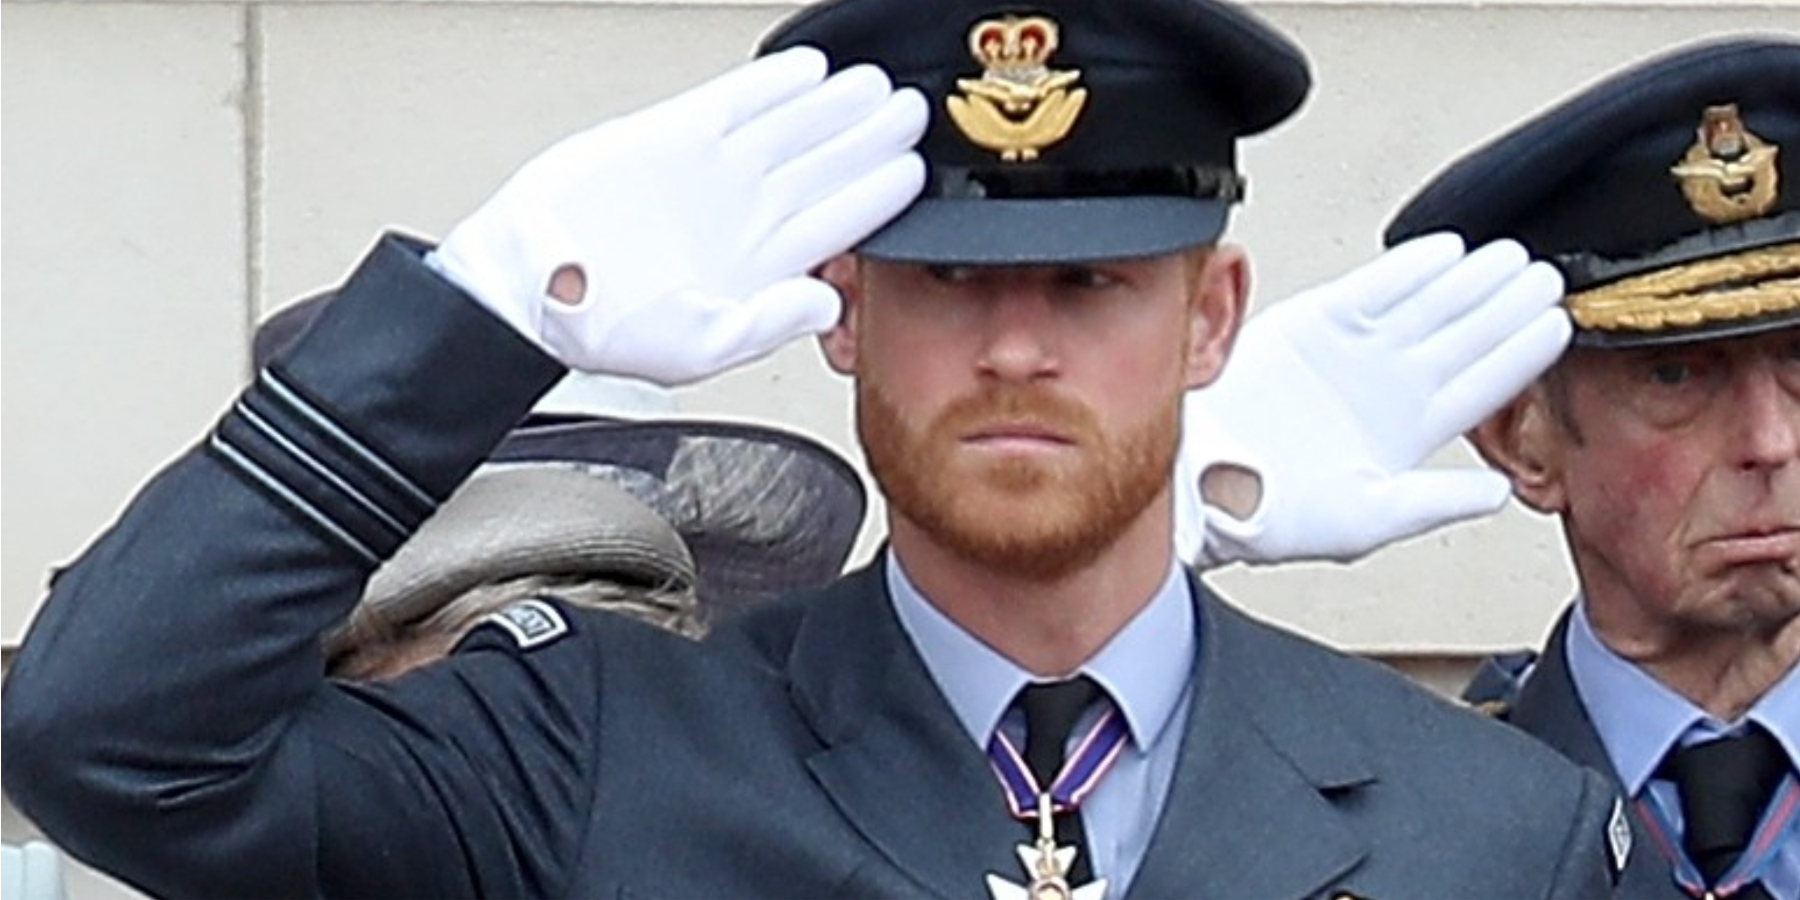 Prince Harry salutes wearing his full military uniform in a photo taken in 2018.